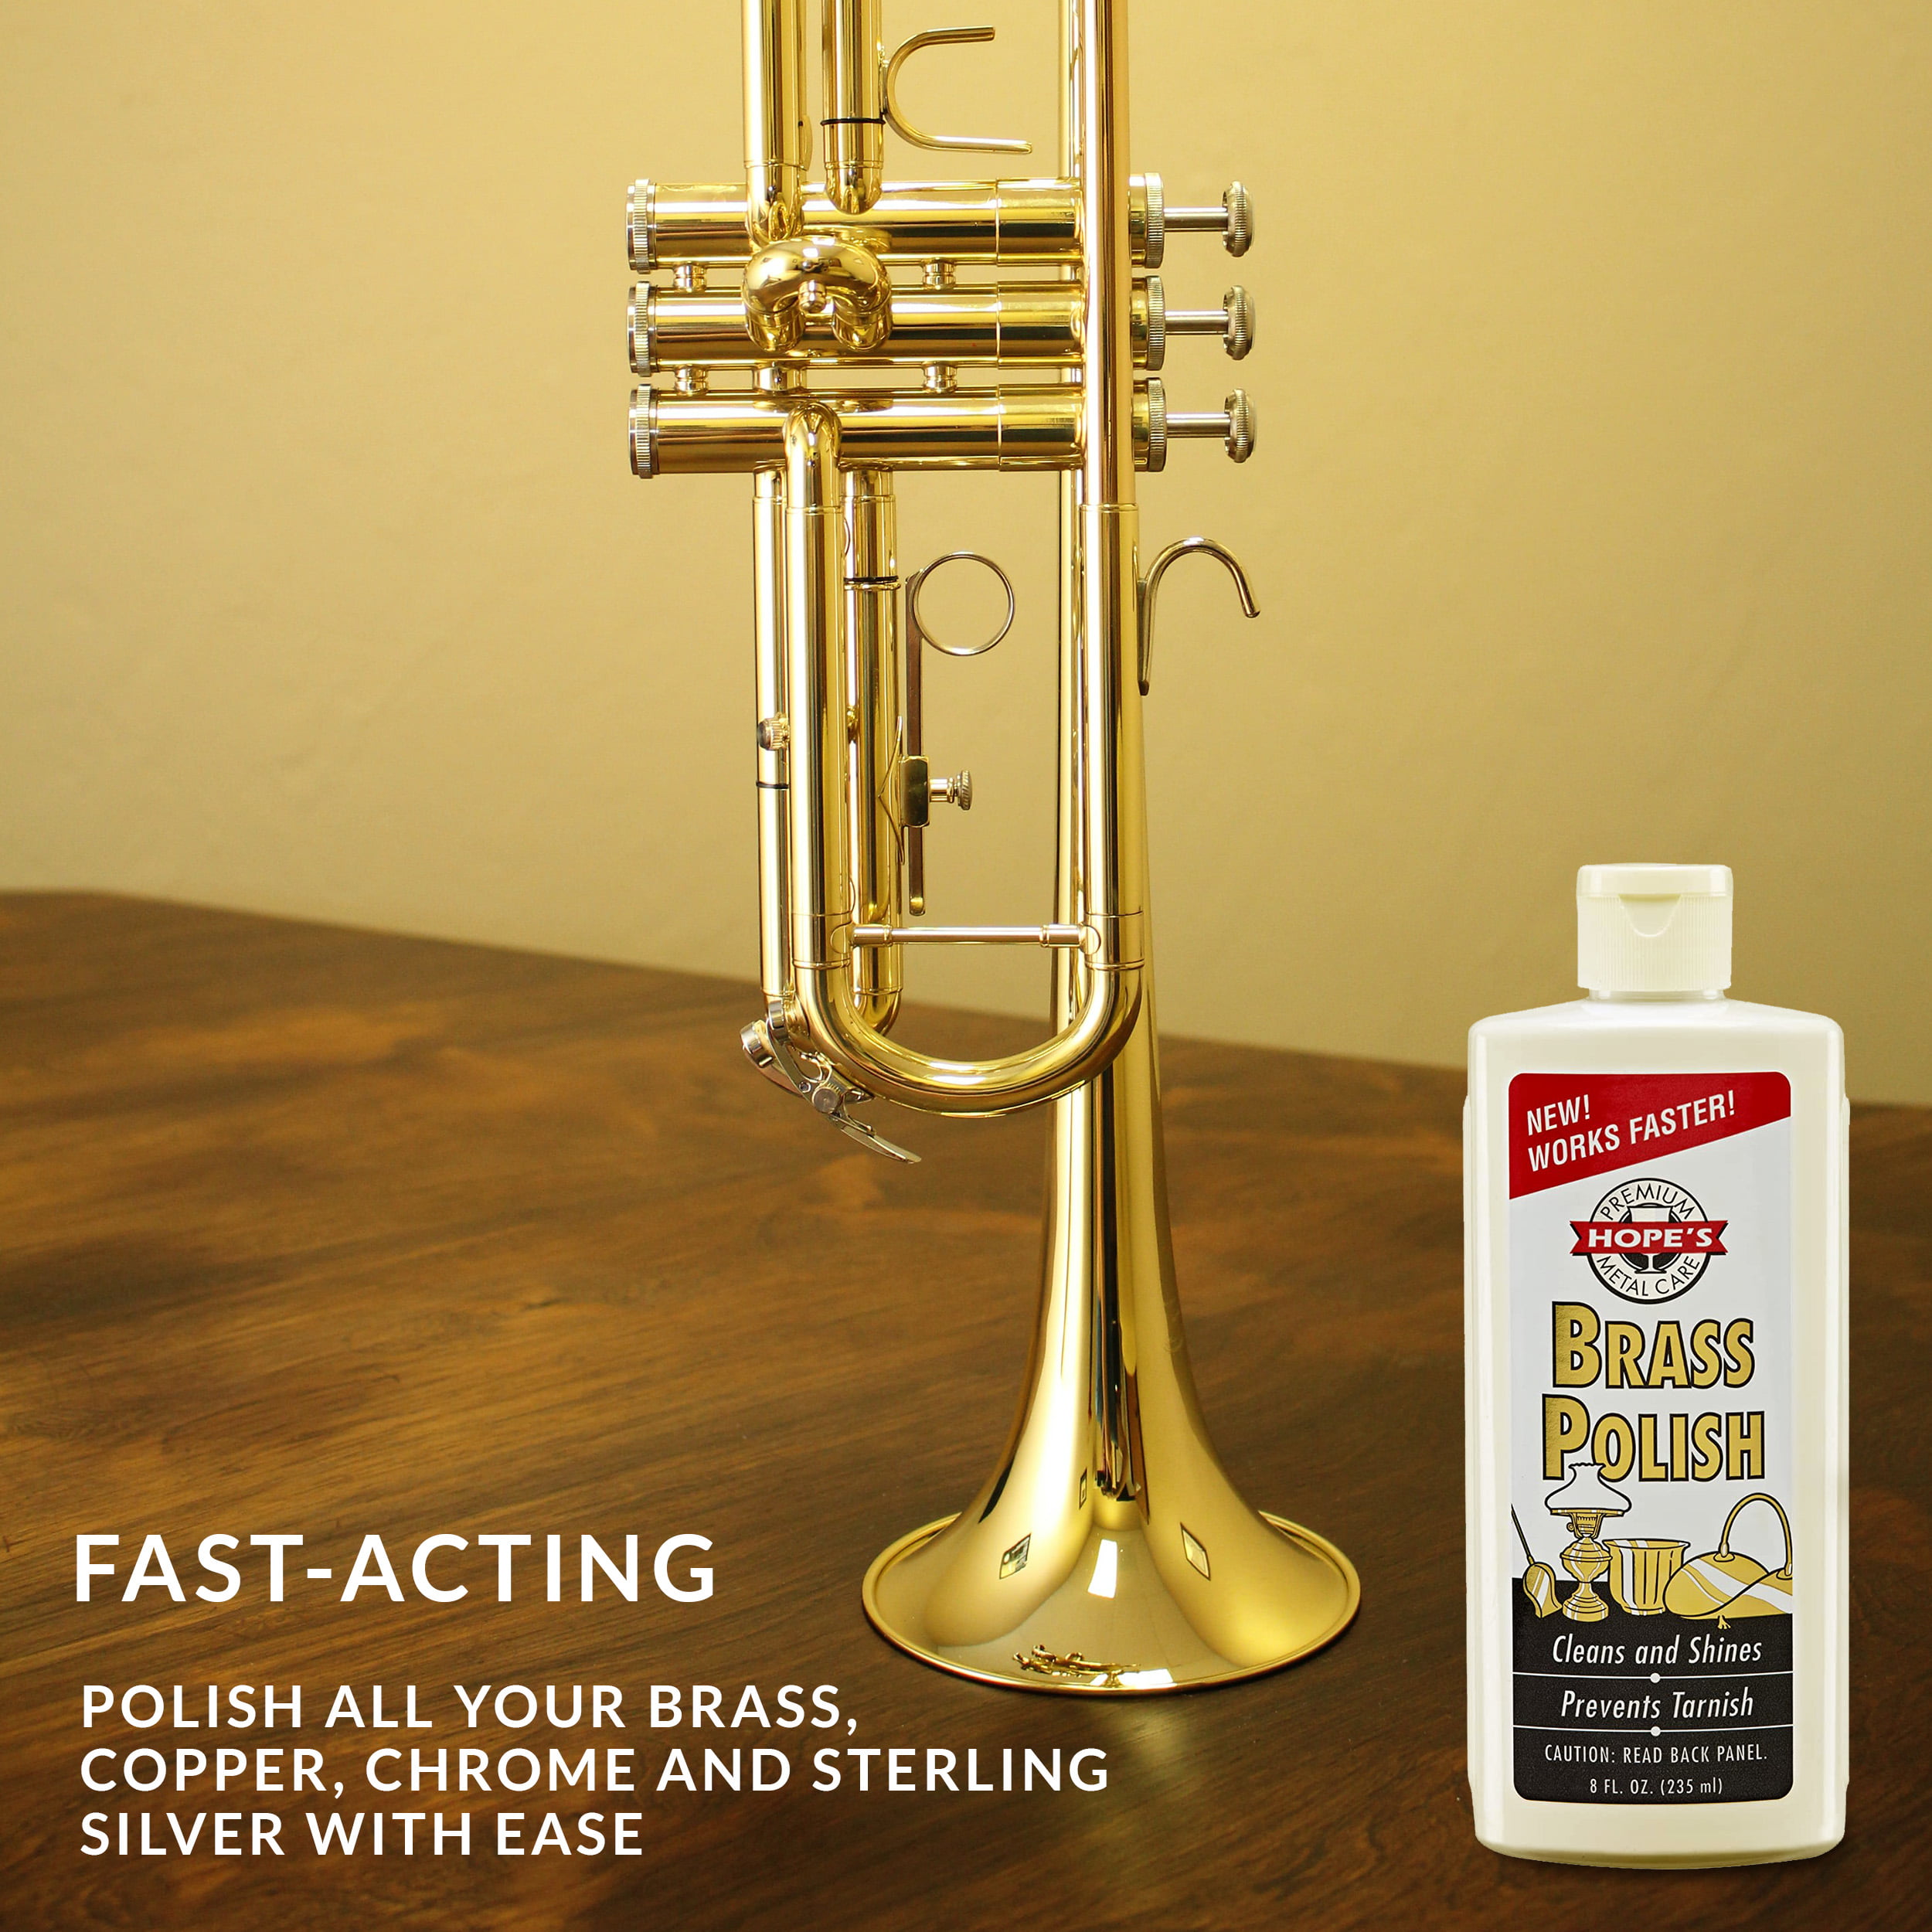 HOPE'S Brass Polish and Cleaner, Prevents Tarnish, Safe for Brass, Copper,  Chrome, and Sterling Silver, Metal Polish for Cymbals, Trombone, Trumpet